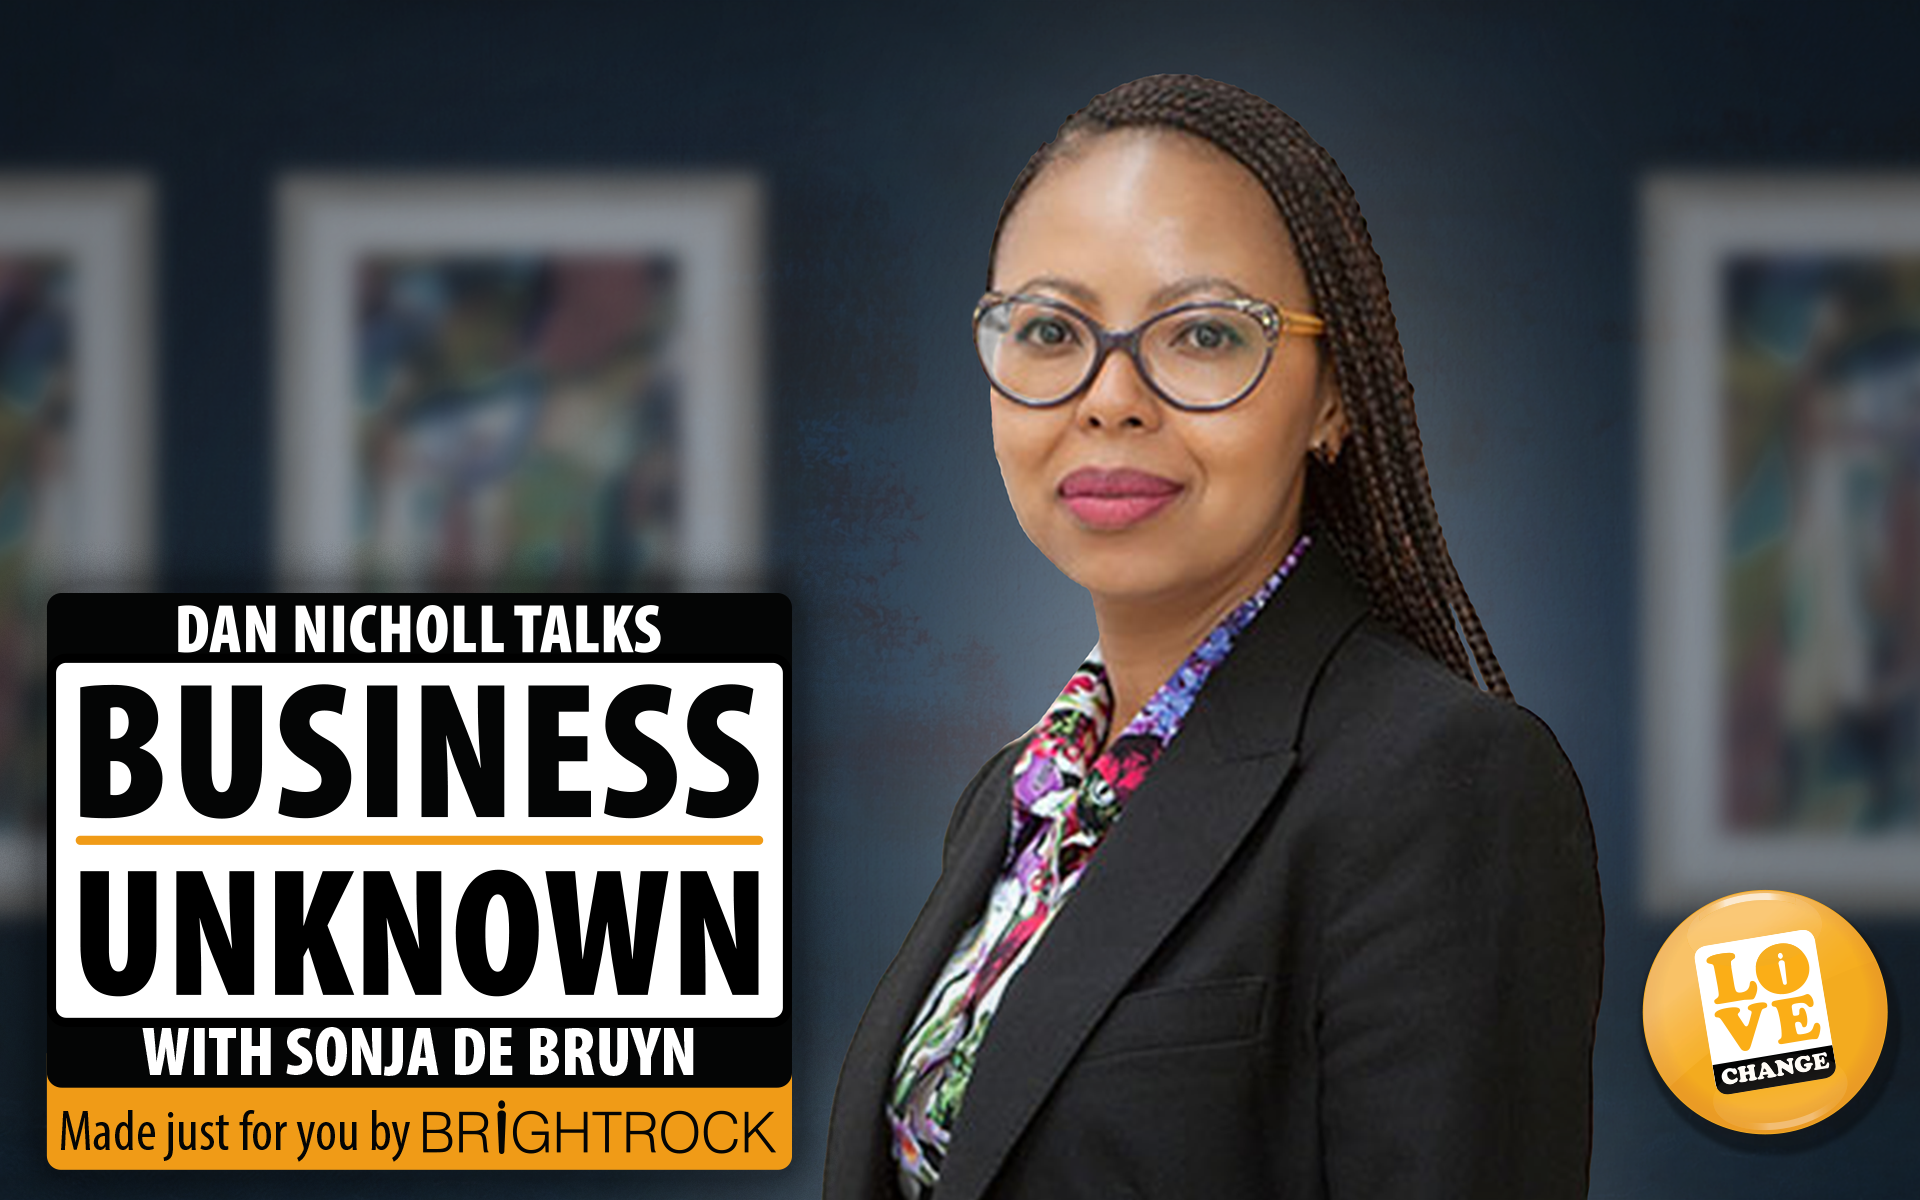 Business Unknown with Sonja de Bruyn